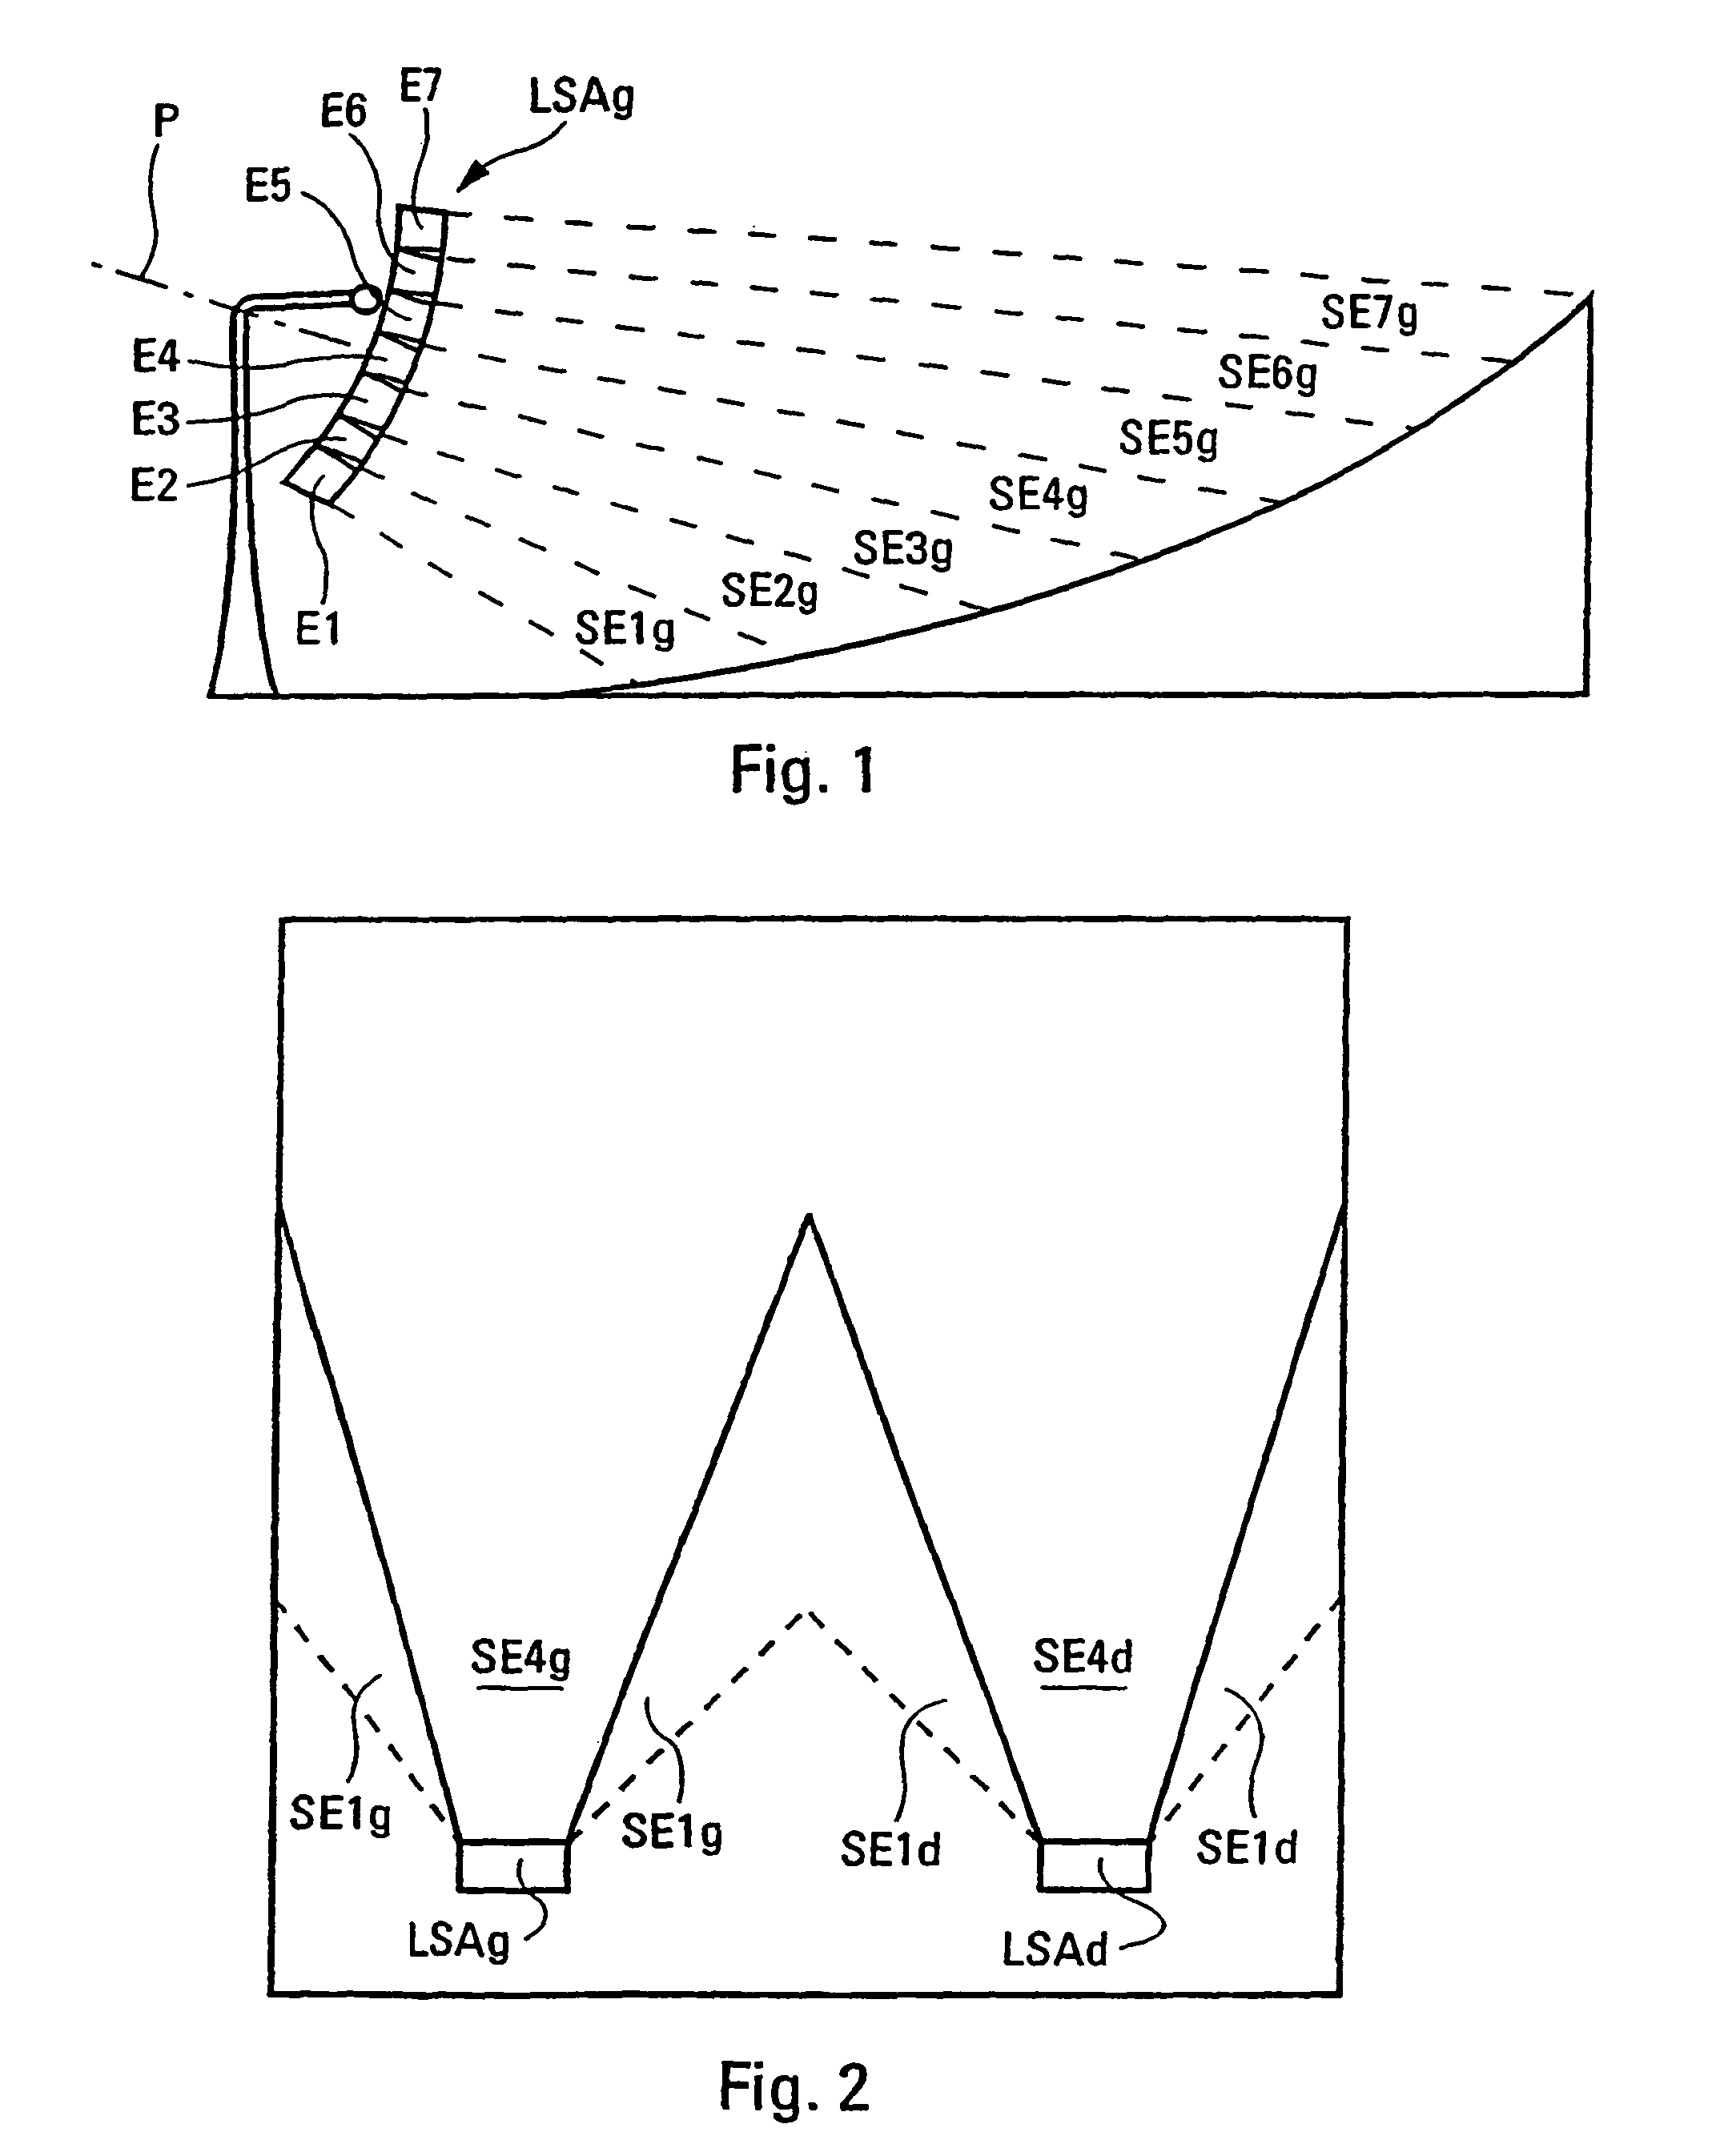 Public address system with adjustable directivity